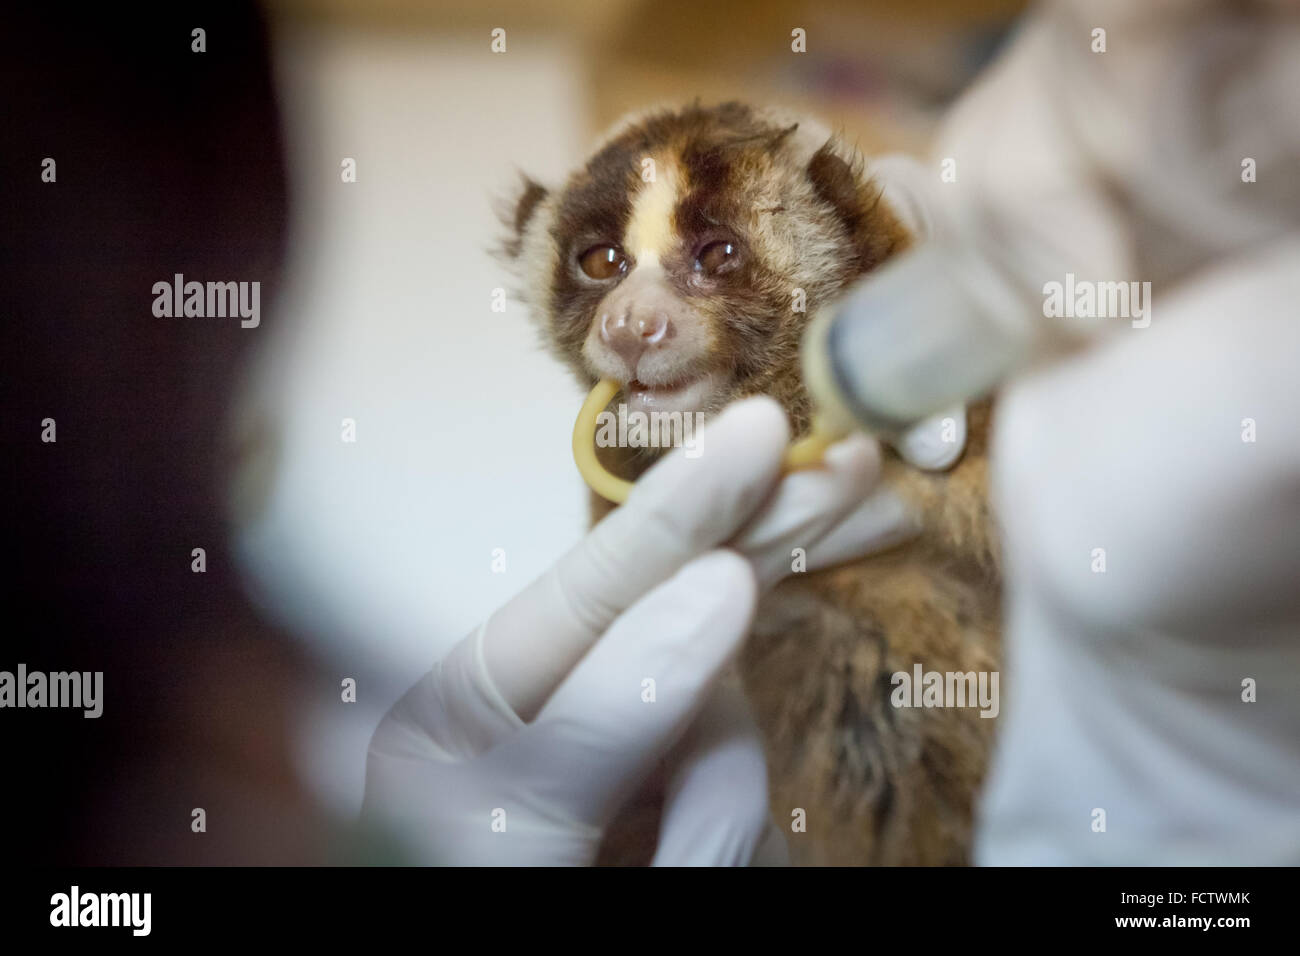 A javan slow loris being fed during medical treatment in a rehabilitation center operated by International Animal Rescue (IAR) in Bogor, Indonesia. Stock Photo